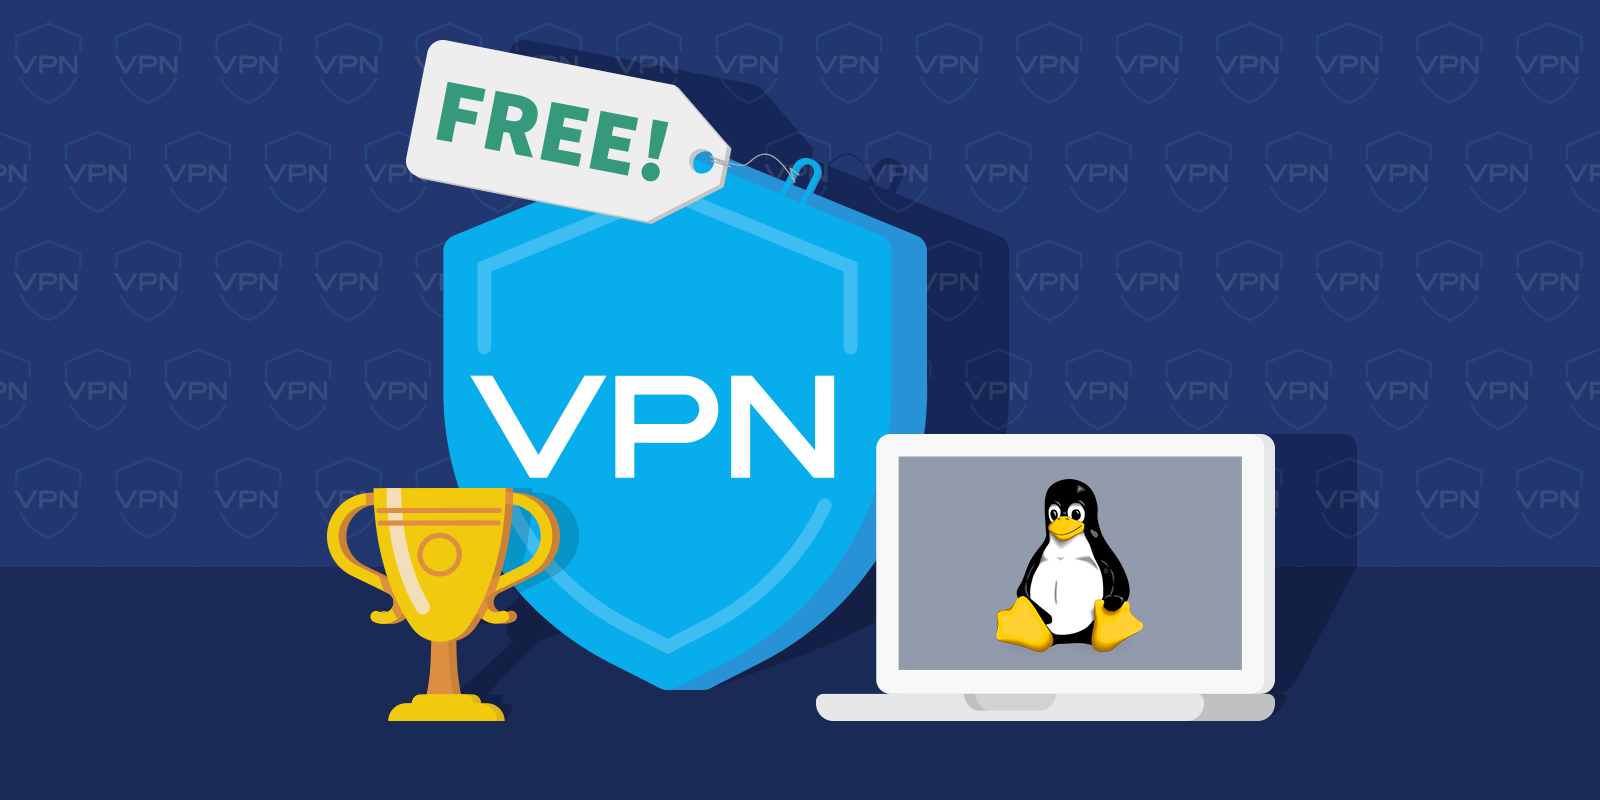 The Top 5 Best Free VPNs for Linux Featured image